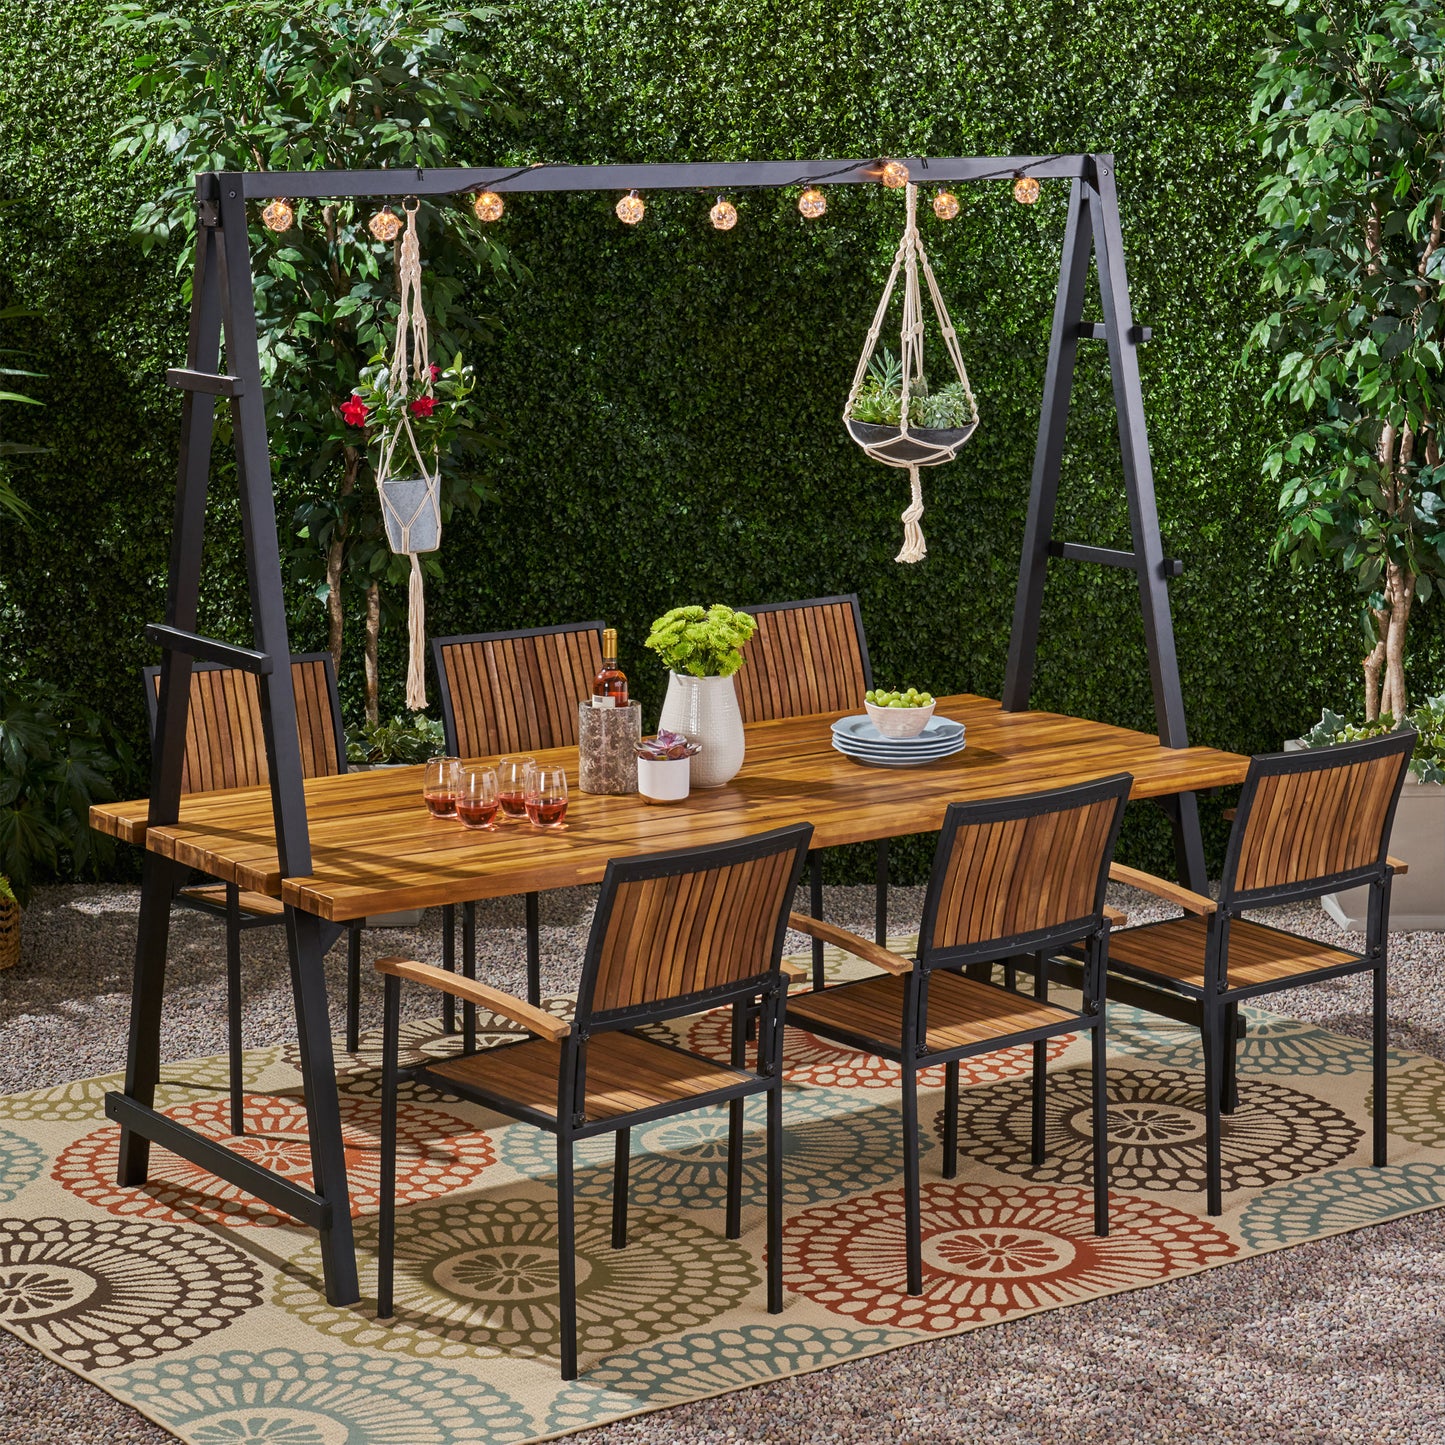 Durban Outdoor 6 Seater Acacia Wood and Iron Planter Dining Set